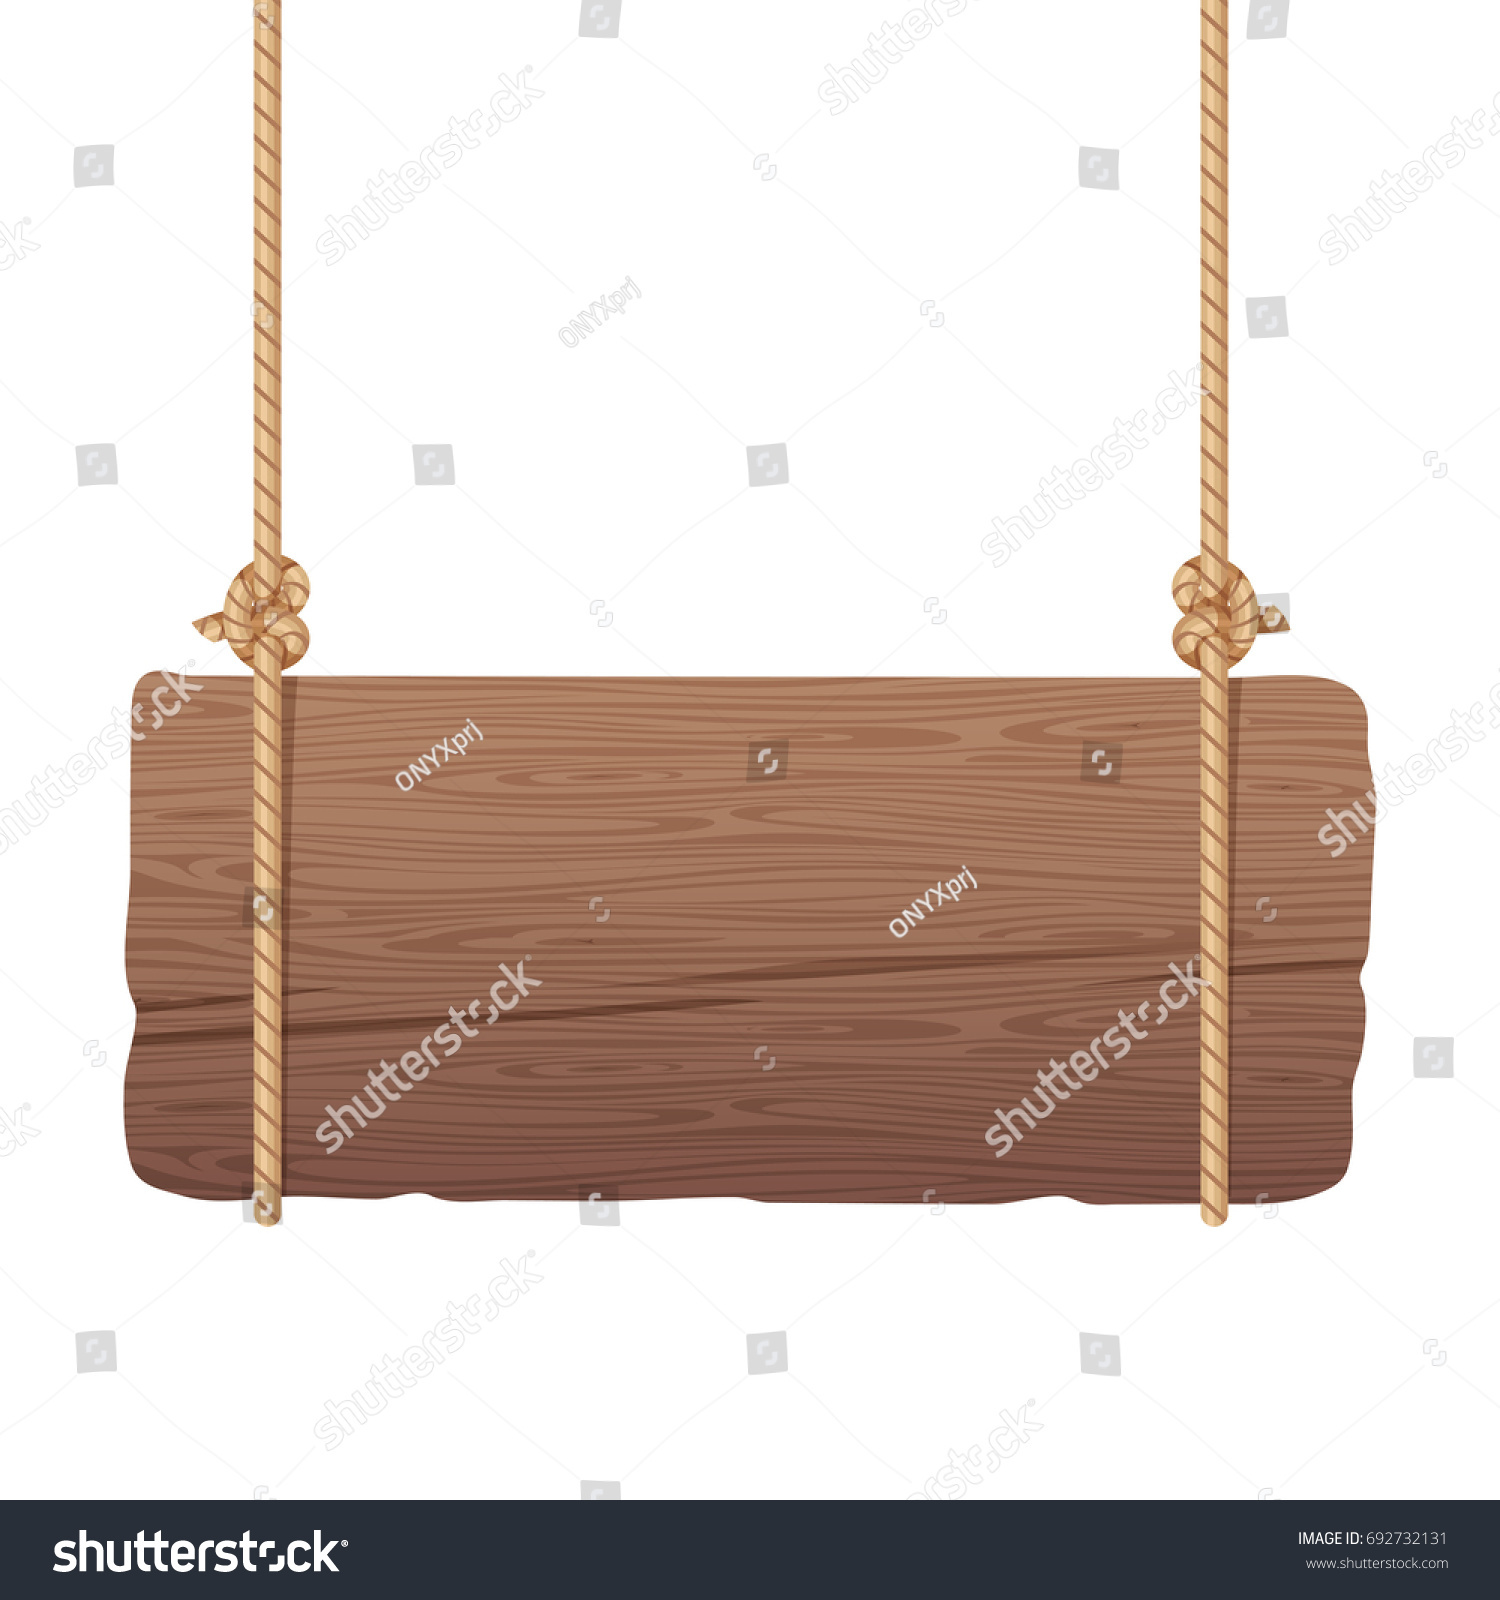 Wooden singboard hanging on ropes